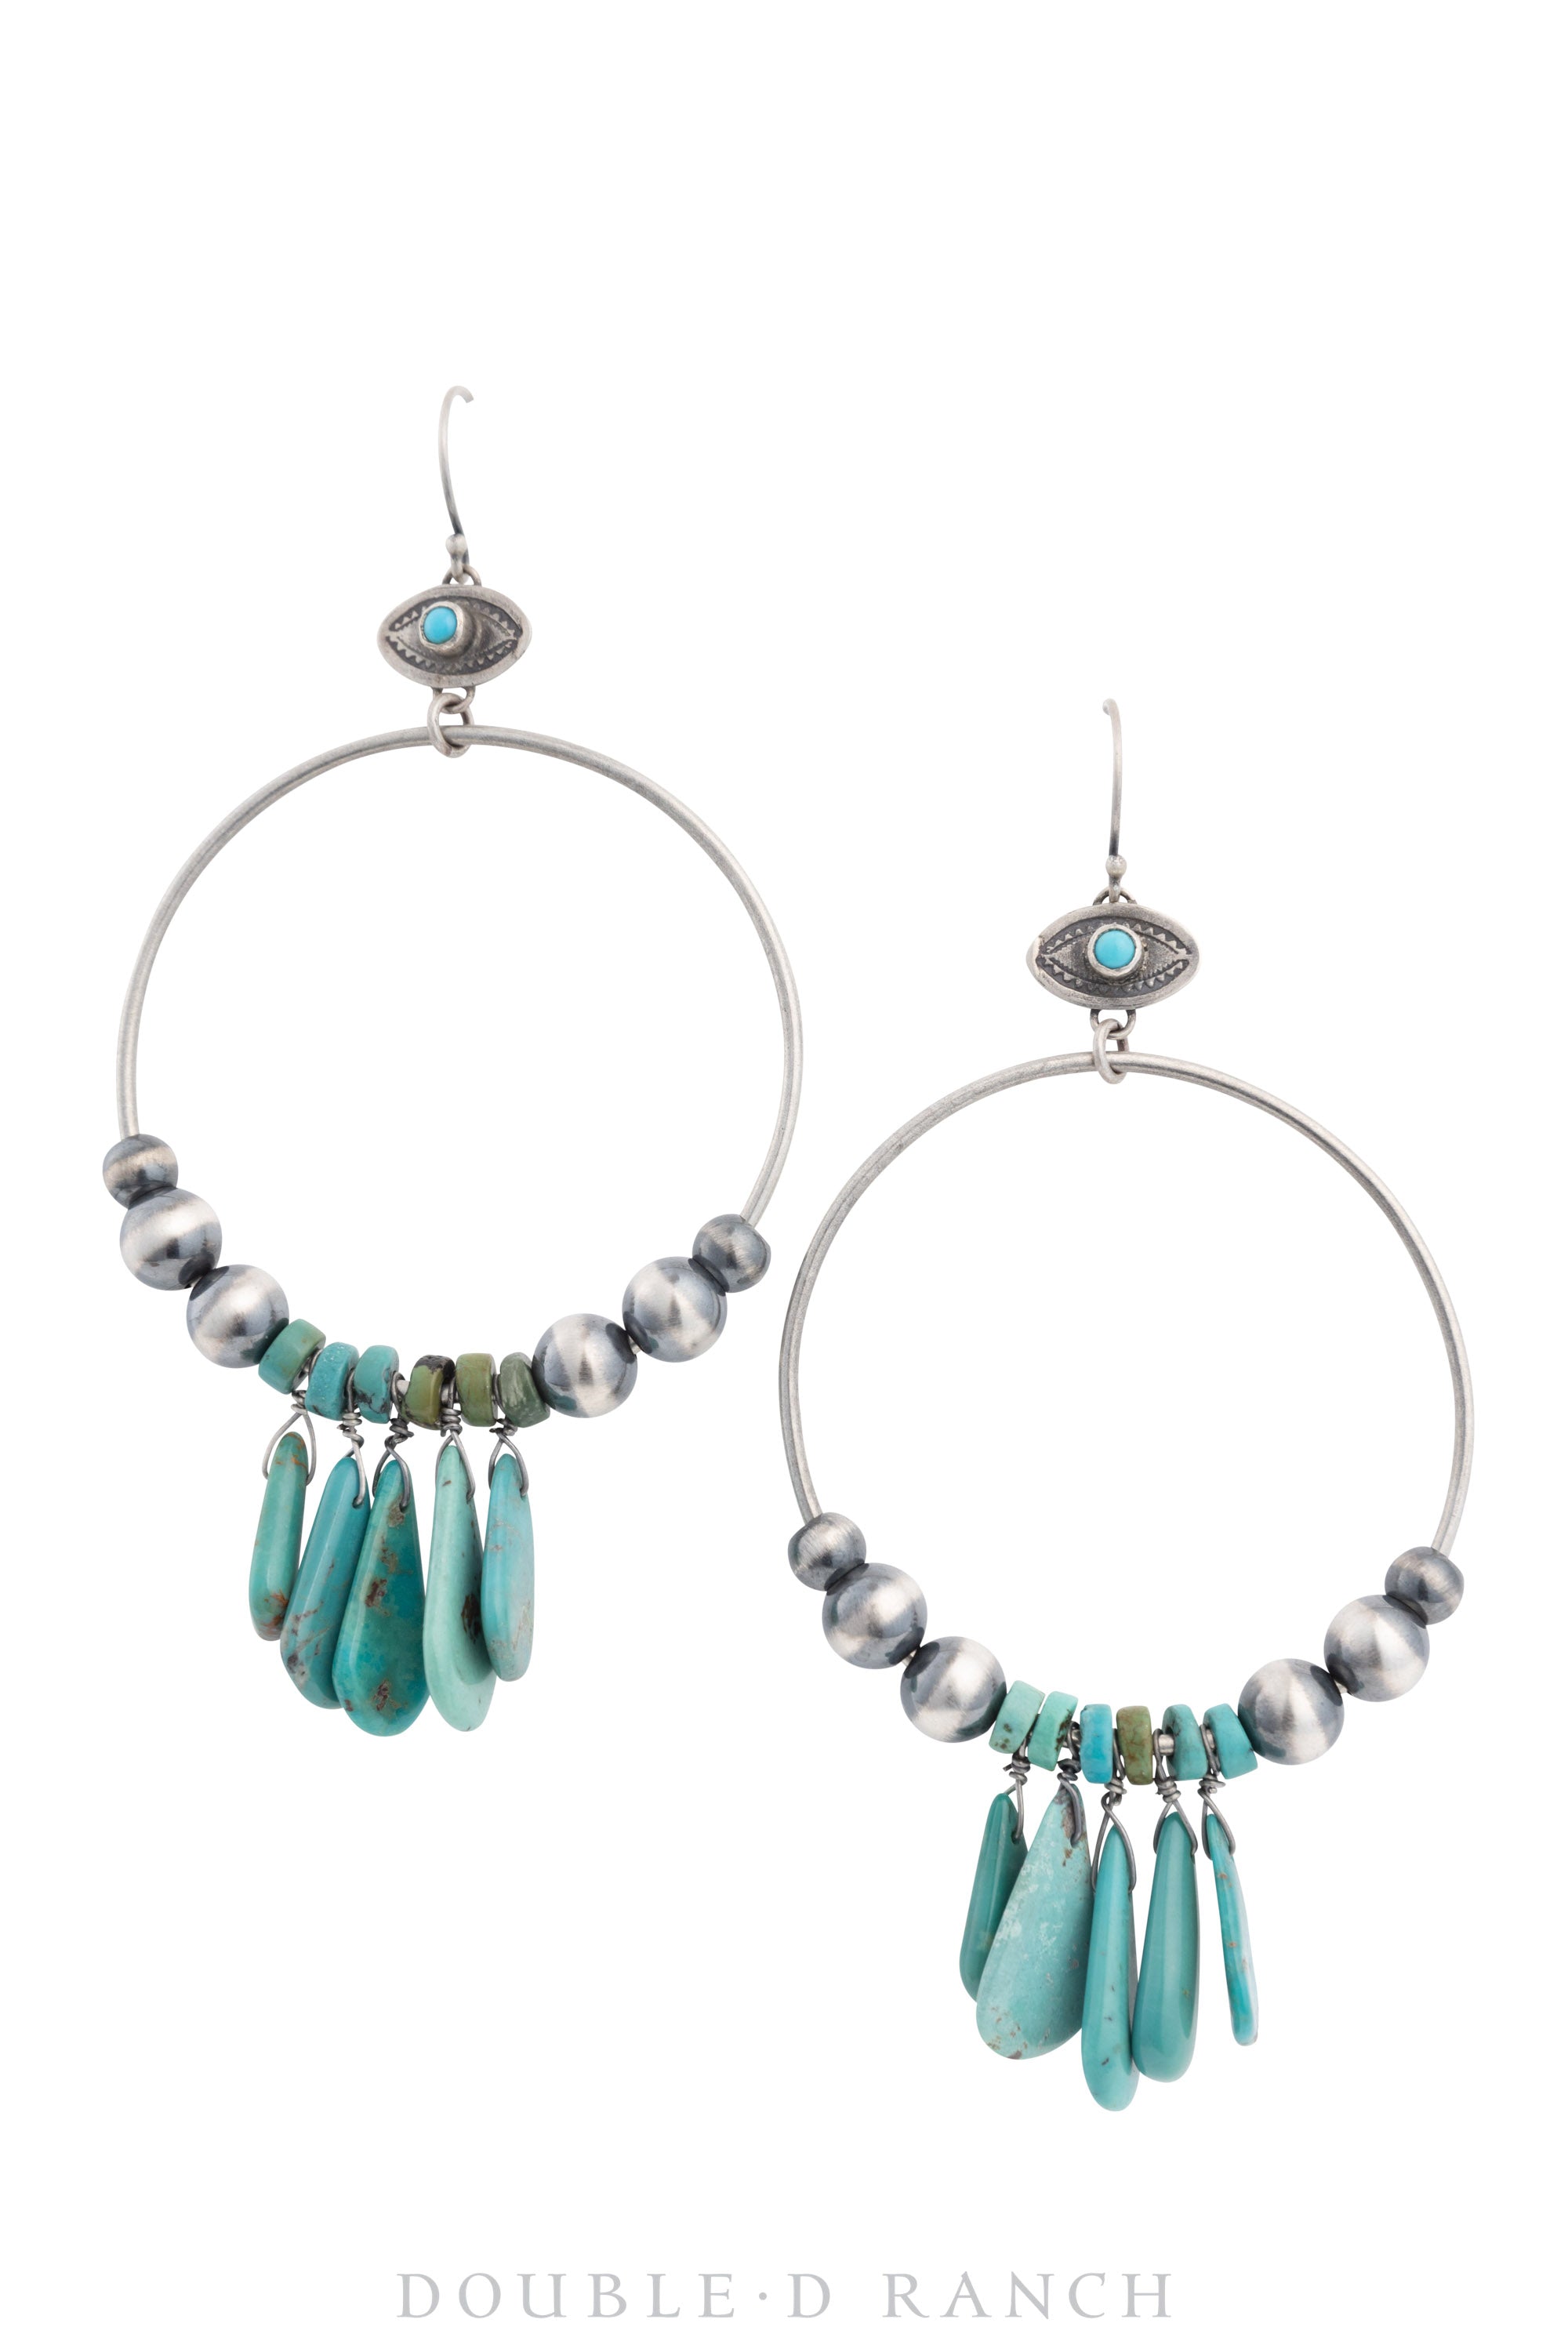 Earrings, Hoop, Turquoise, Sterling Silver, Contemporary, 1467